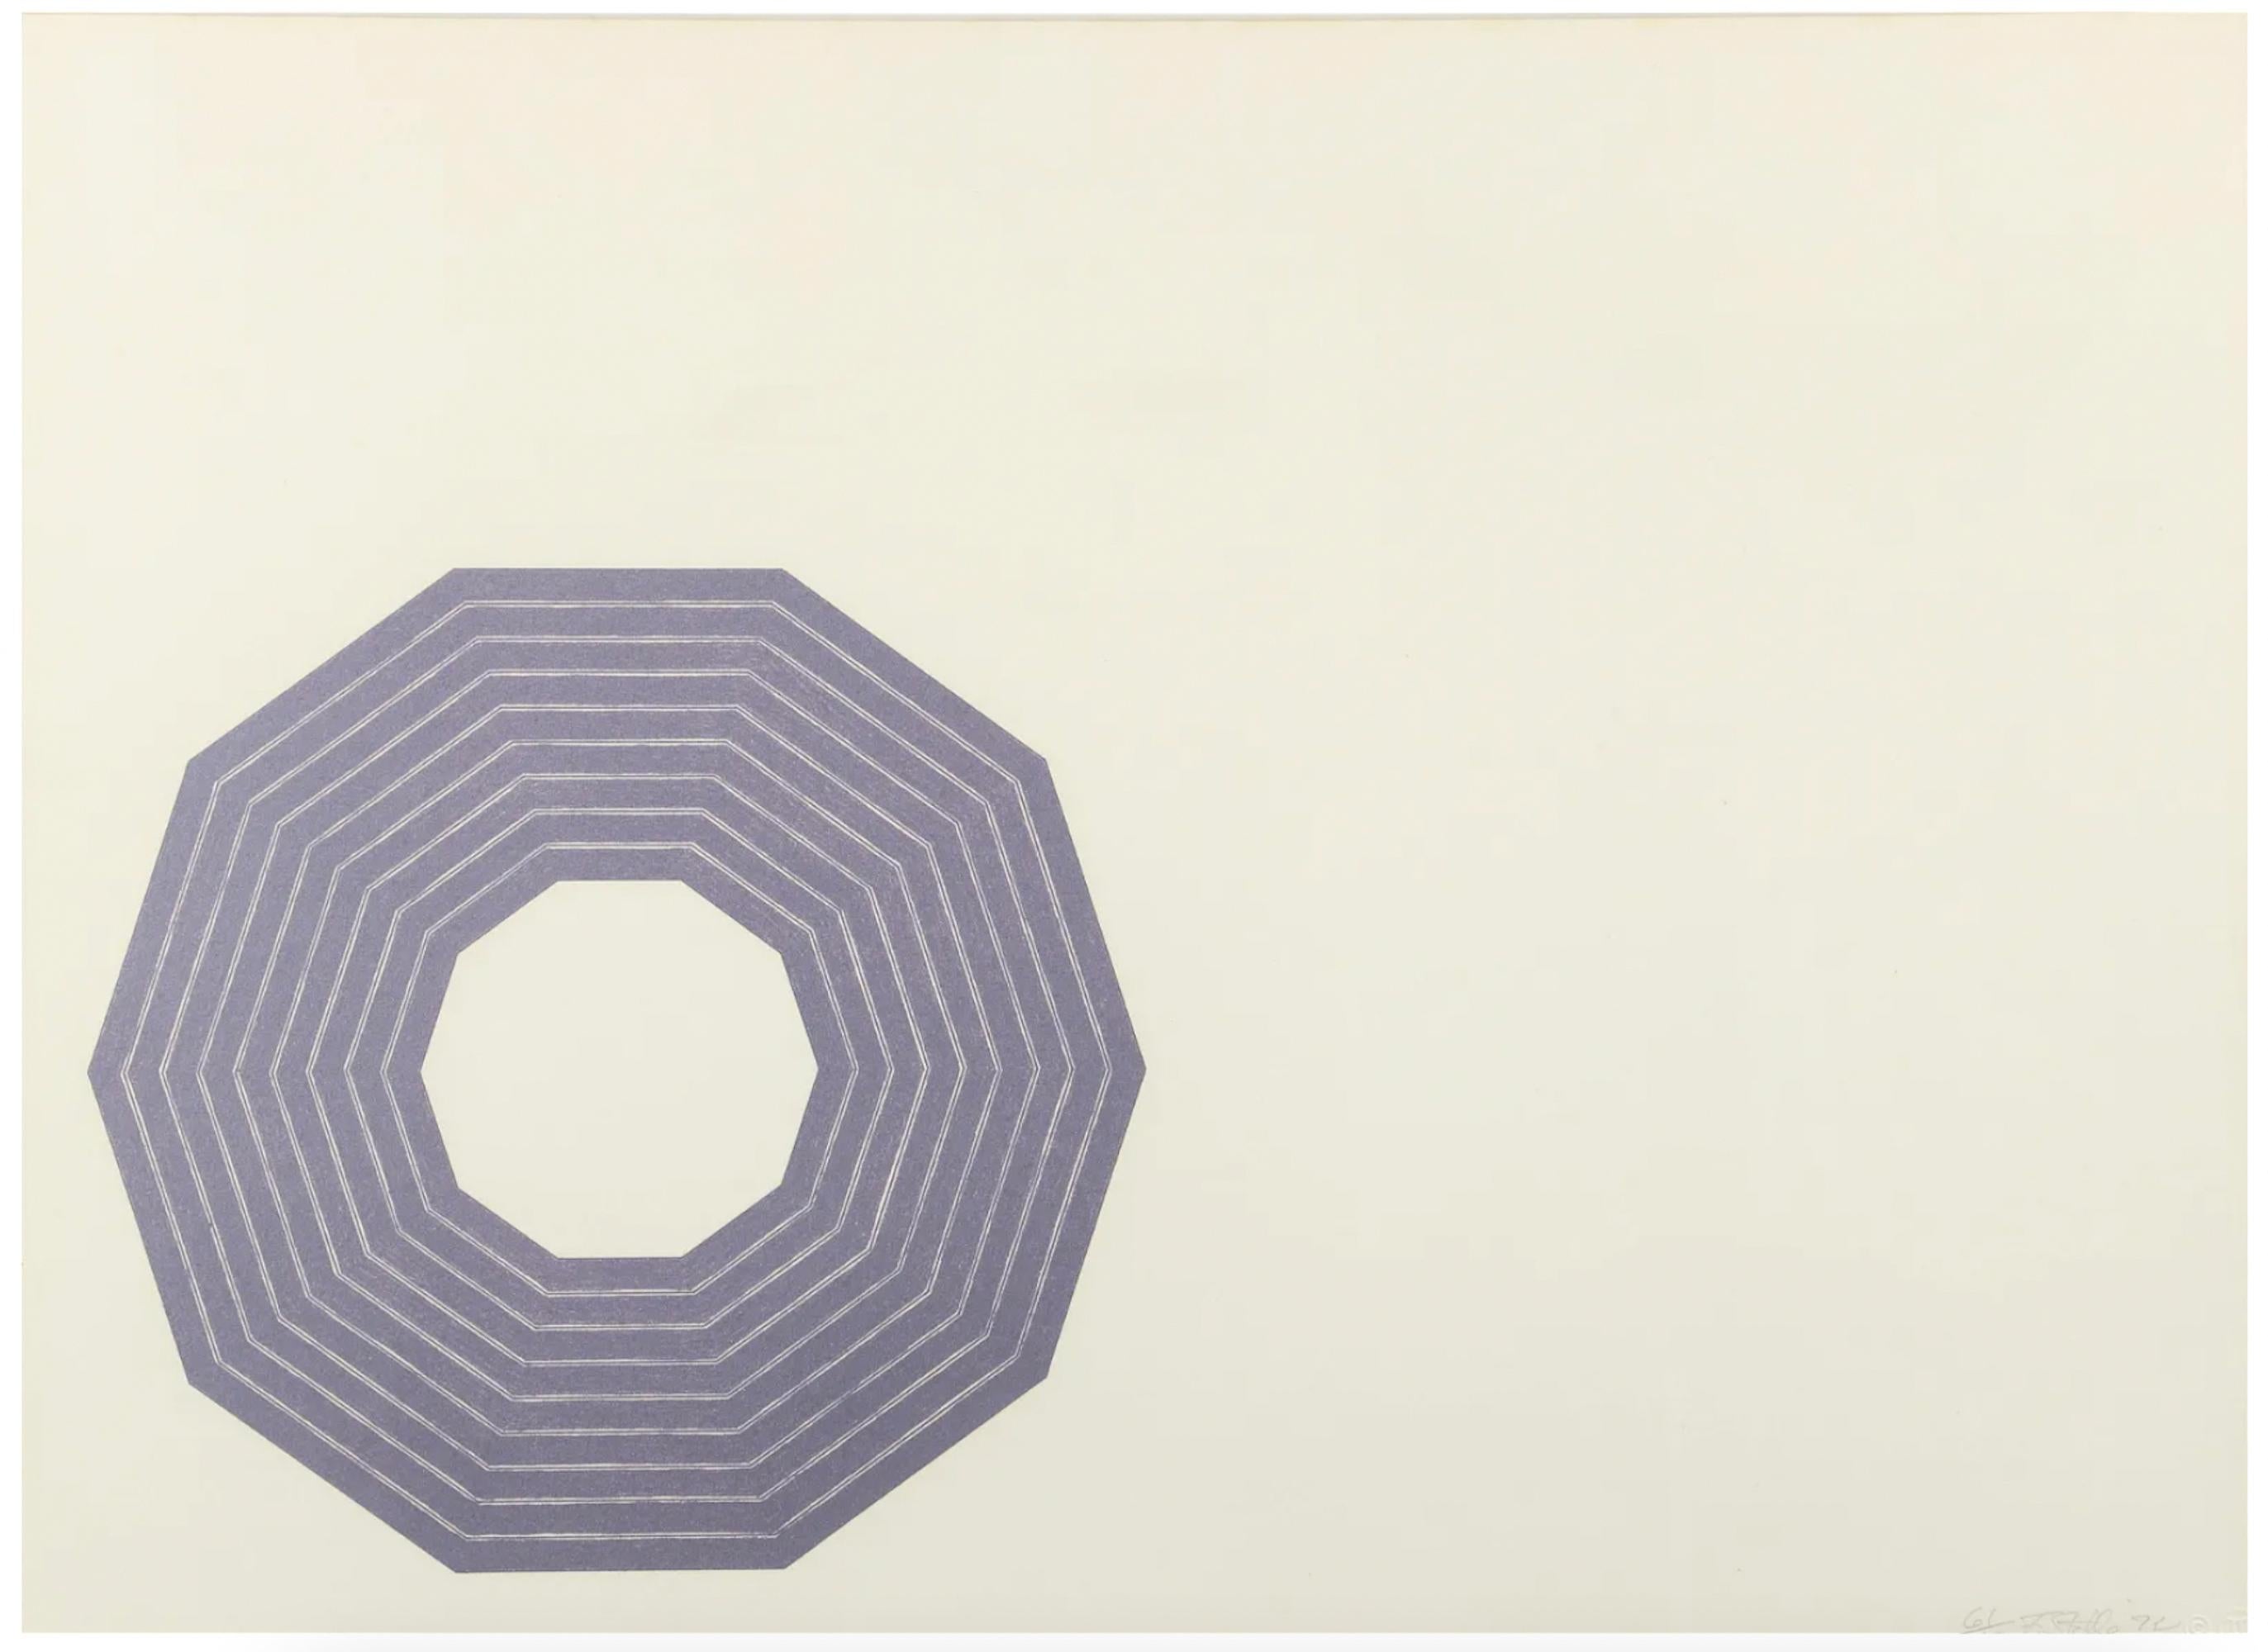 FRANK STELLA (1936-Present)

Frank Stella's 'D from Purple Series' is a 1972 lithograph on wove paper, signed, dated and numbered 61/100 lower right corner, published by Gemini G.E.L. with their chop lower right and also stamped on verso, full sheet